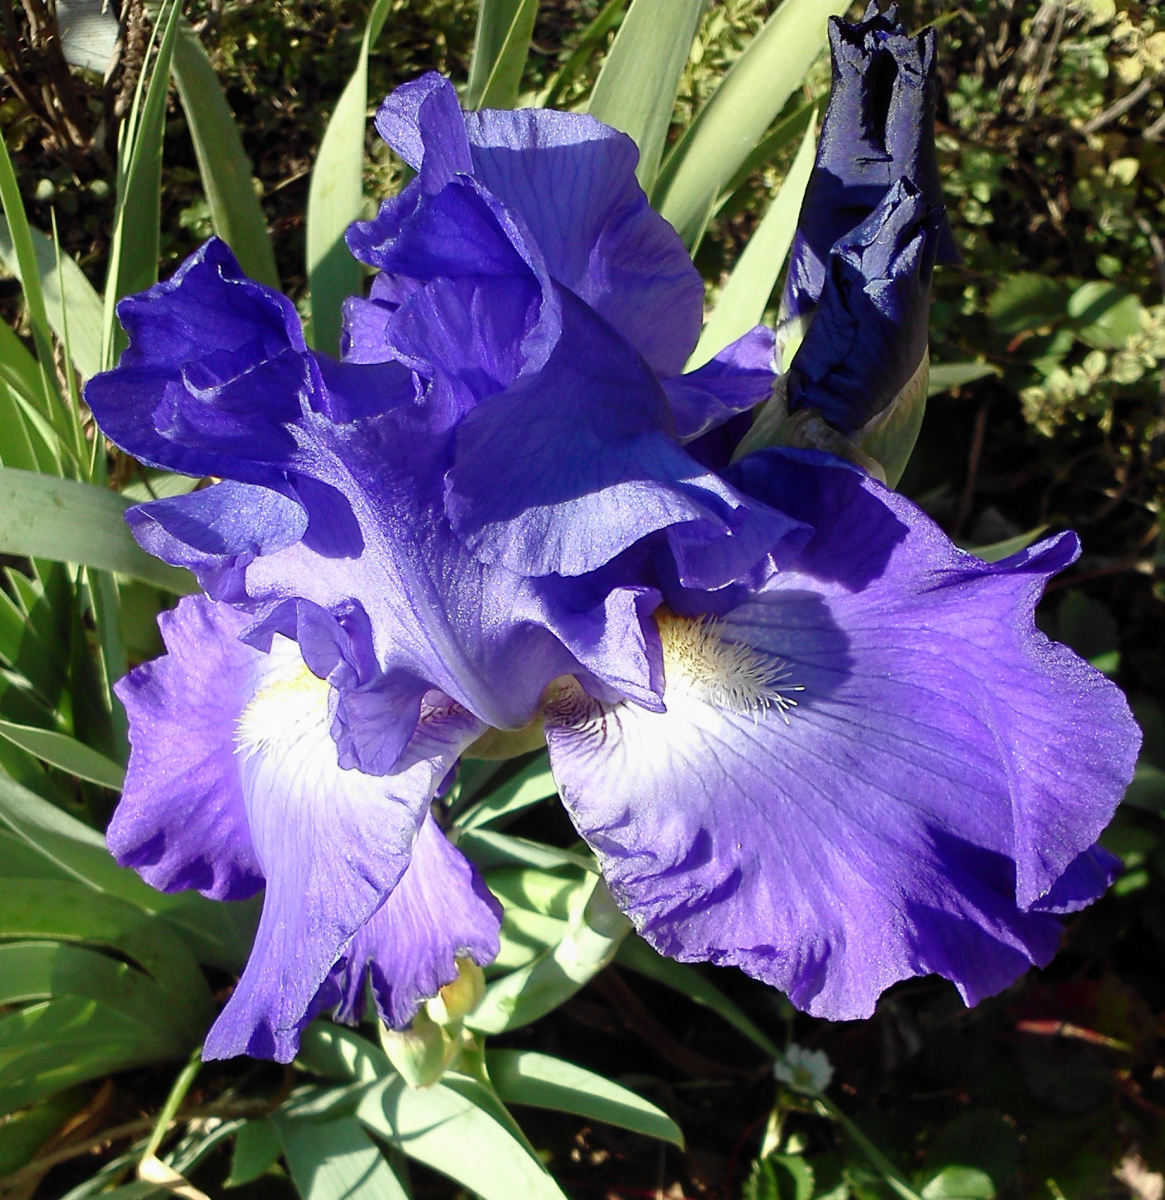 This bearded iris is called Feedback.